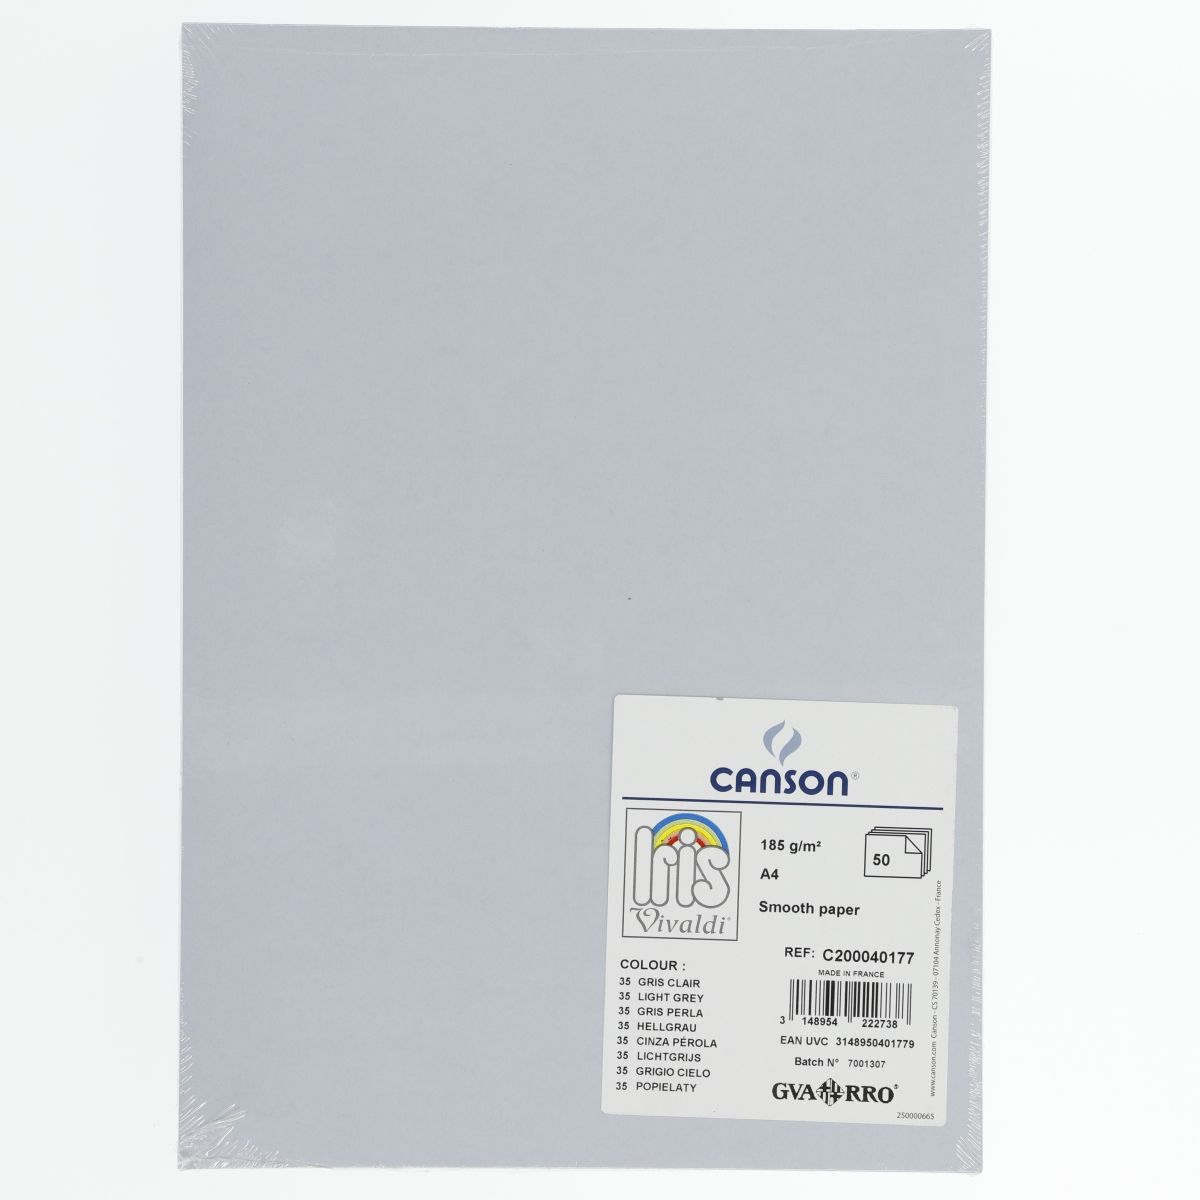 Brystol Canson A4 szary 185g 50k (200040177)